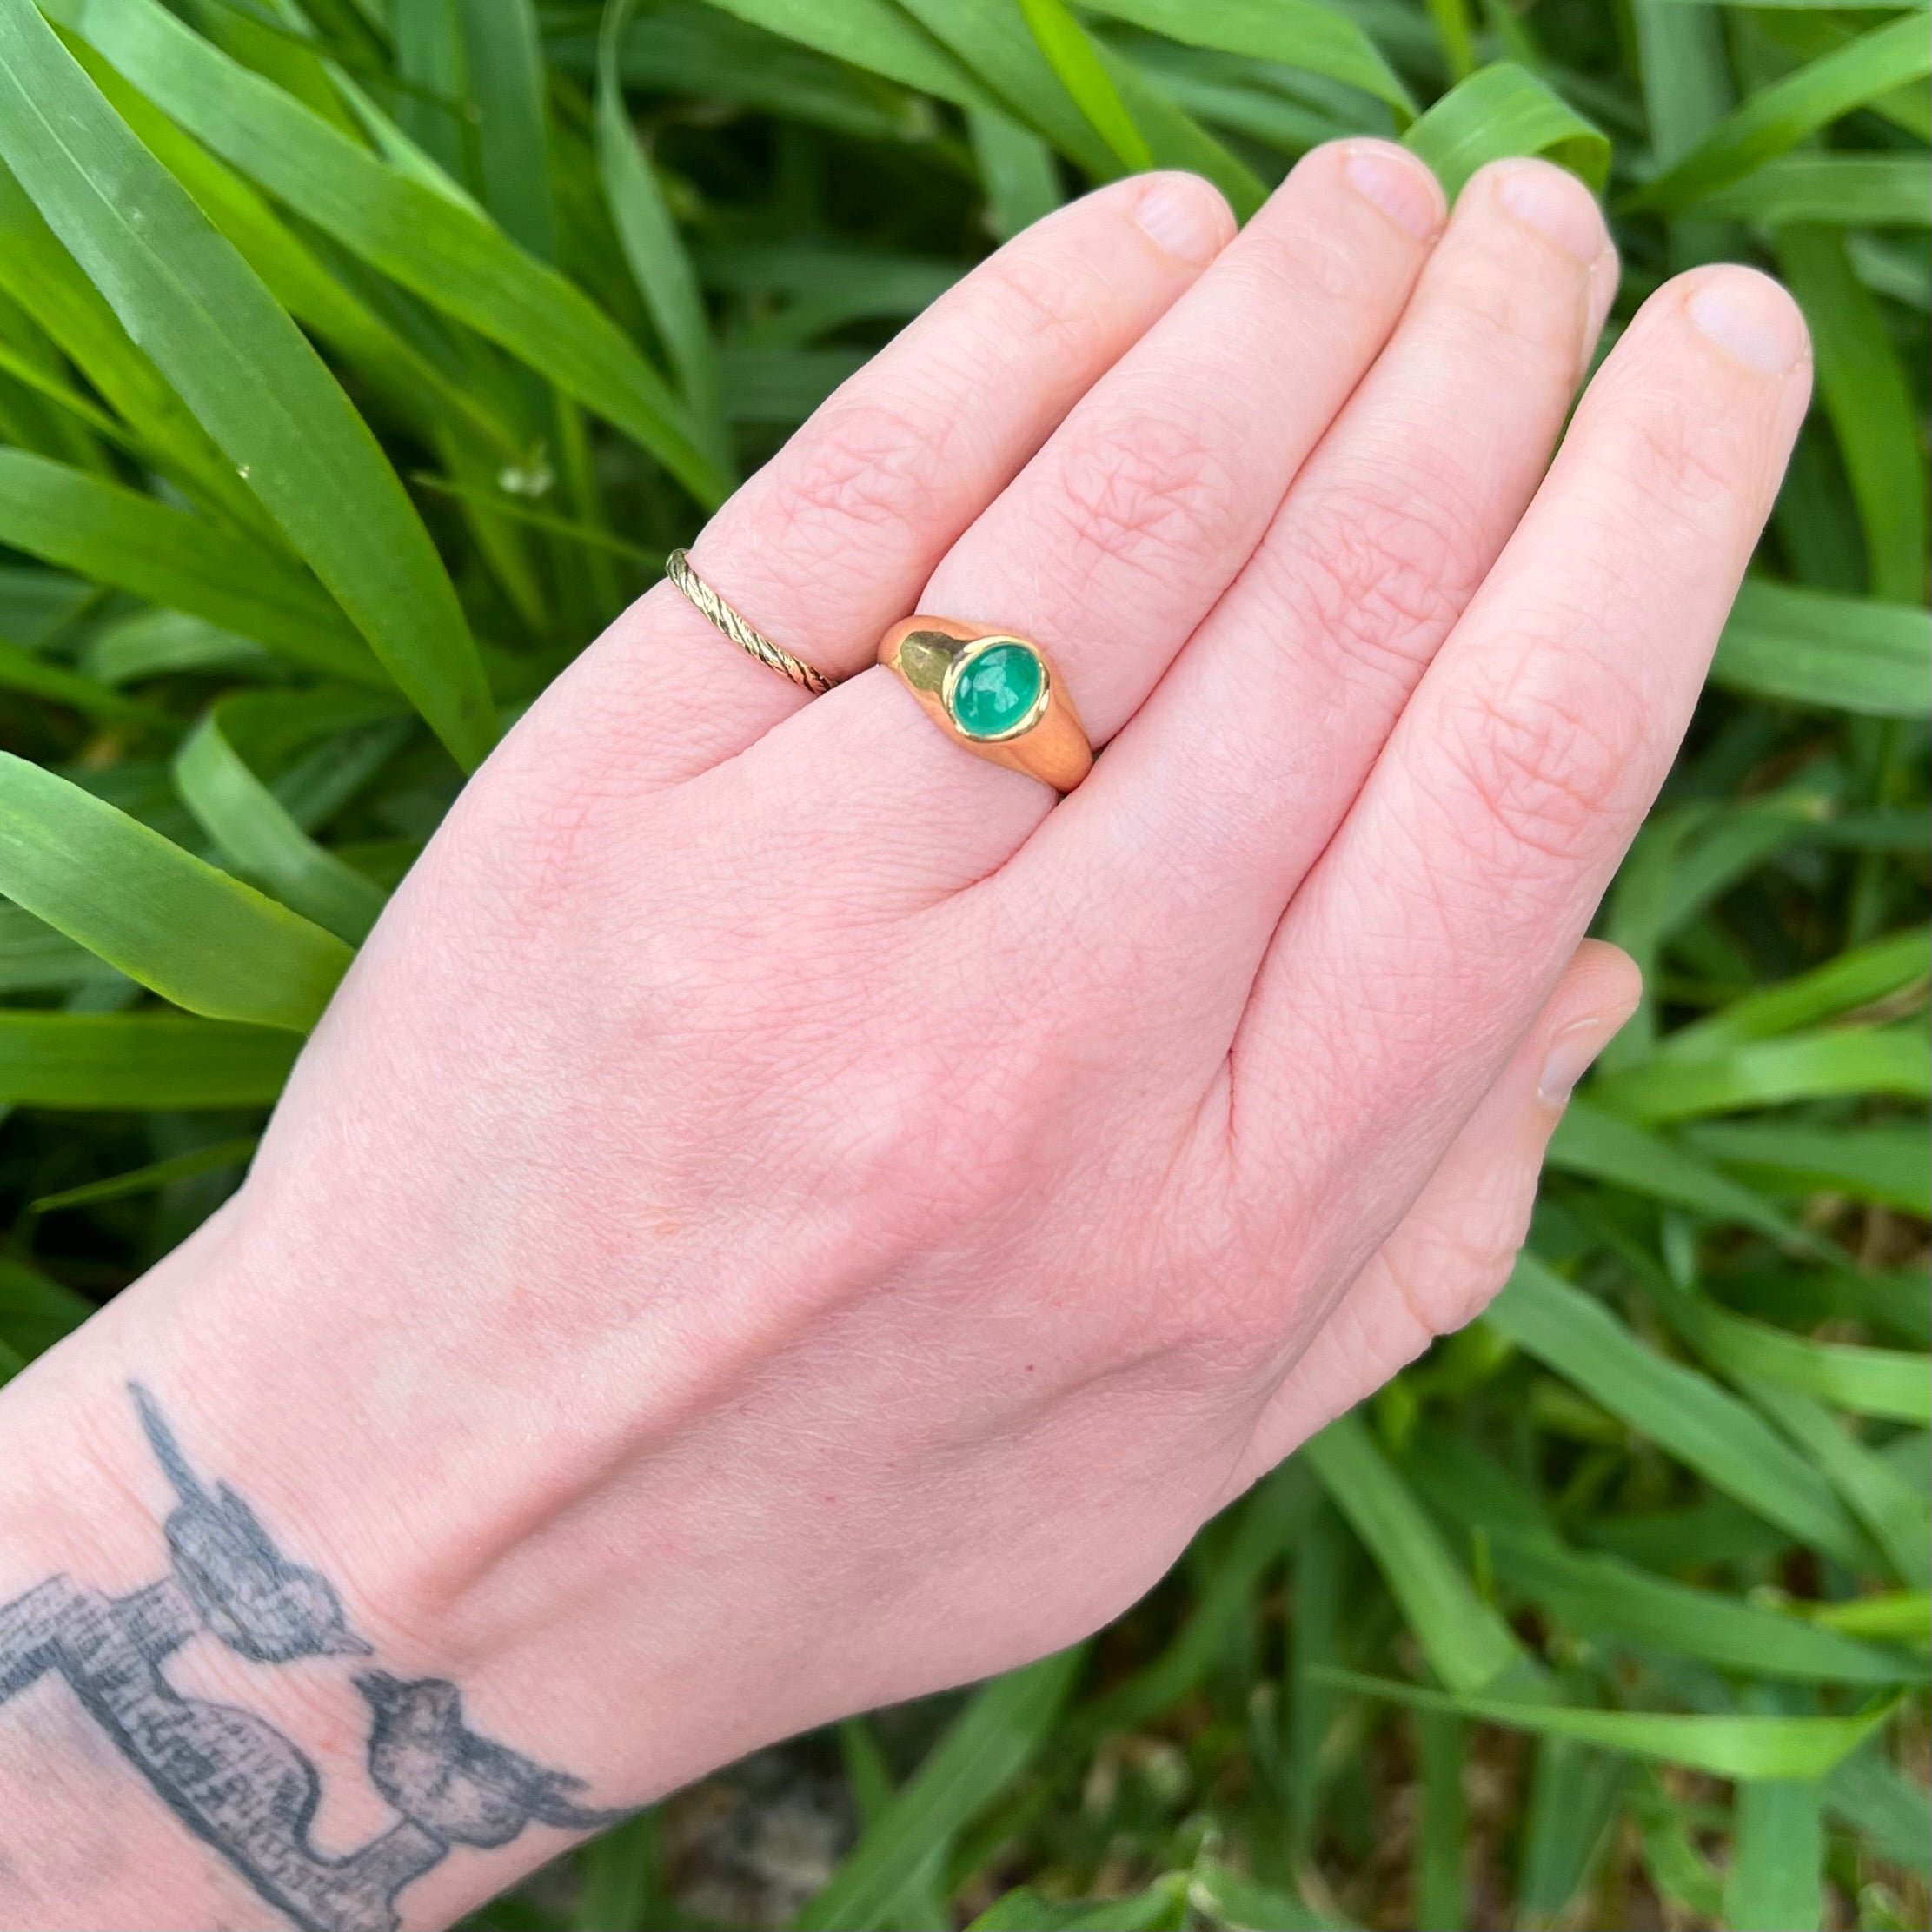 Vintage 18k Gold Cabachon Emerald Dome Ring